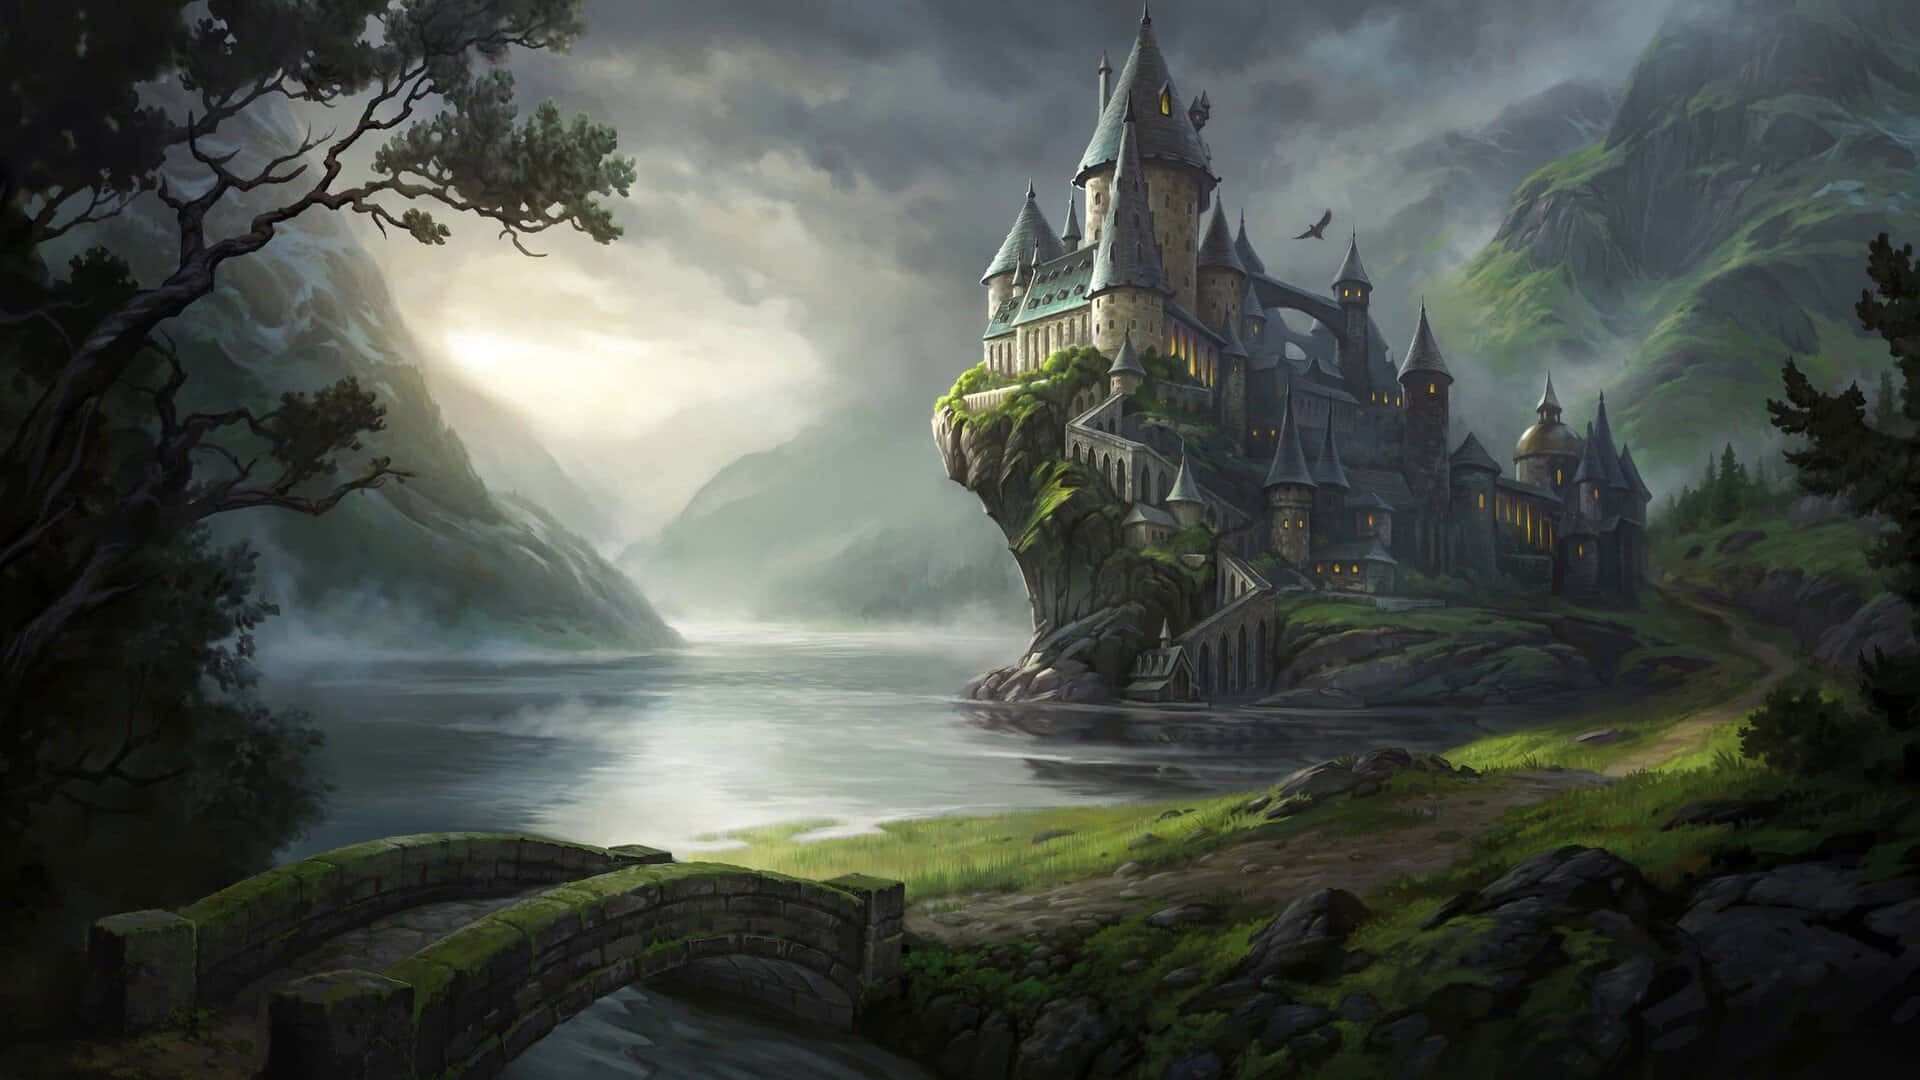 Exciting Harry Potter Adventure Game Wallpaper